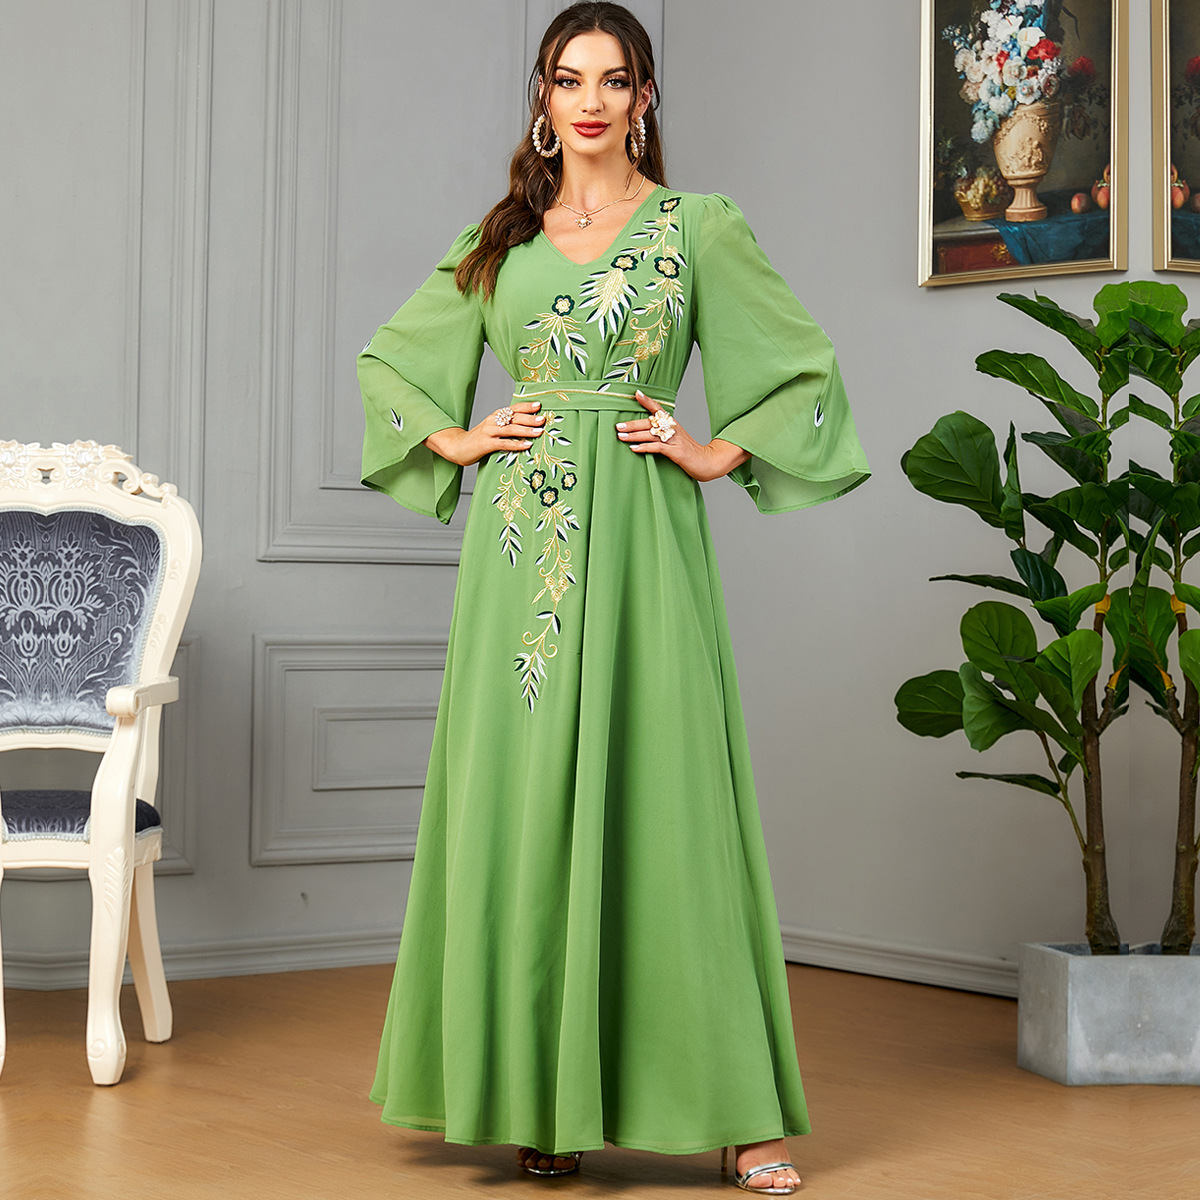 Middle Eastern Muslim new women's v-neck embroidered chiffon fashion robe